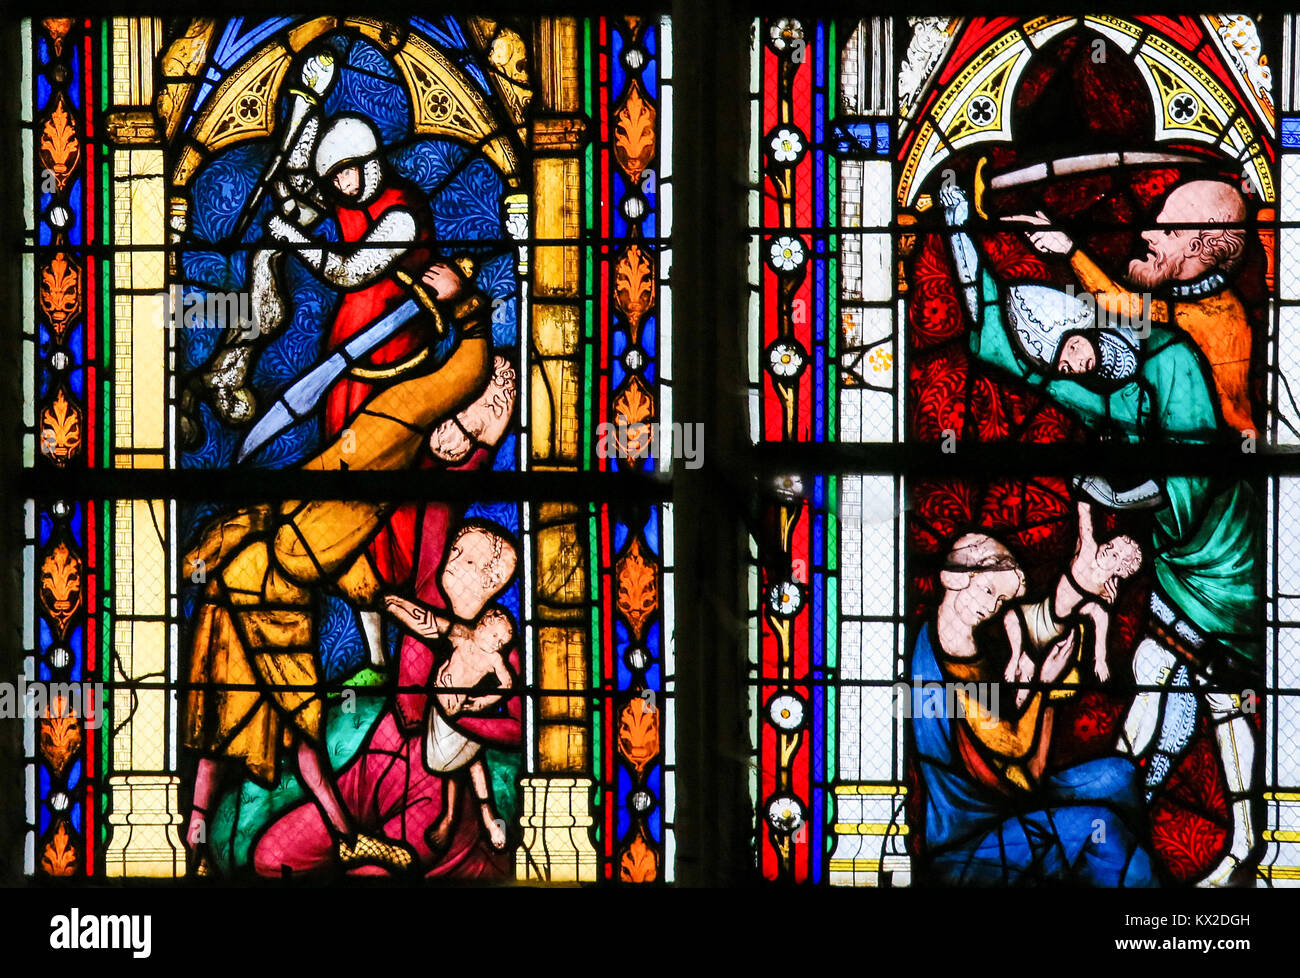 The Massacre of the Innocents, the biblical recount of infanticide by Herod the Great, on a stained glass in the cathedral of Rouen. Stock Photo